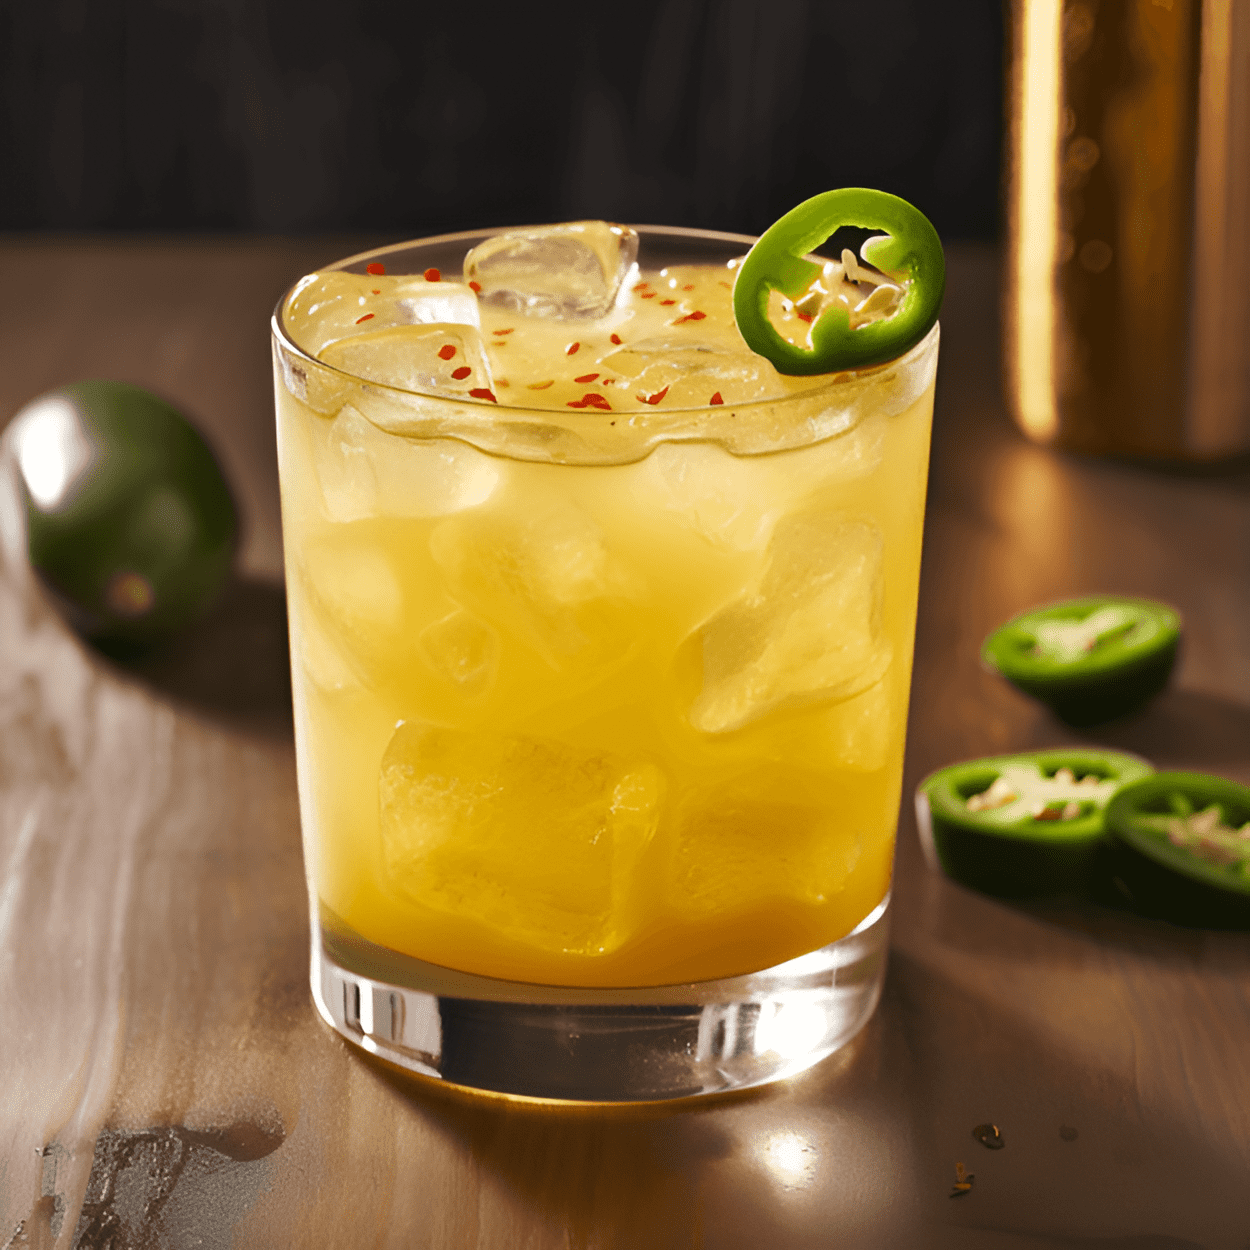 Mustang Cocktail Recipe - The Mustang cocktail is a delightful blend of sweet, sour, and spicy flavors. The sweetness of the pineapple juice is perfectly balanced by the tartness of the lime juice, while the jalapeno adds a surprising kick that elevates the overall taste.